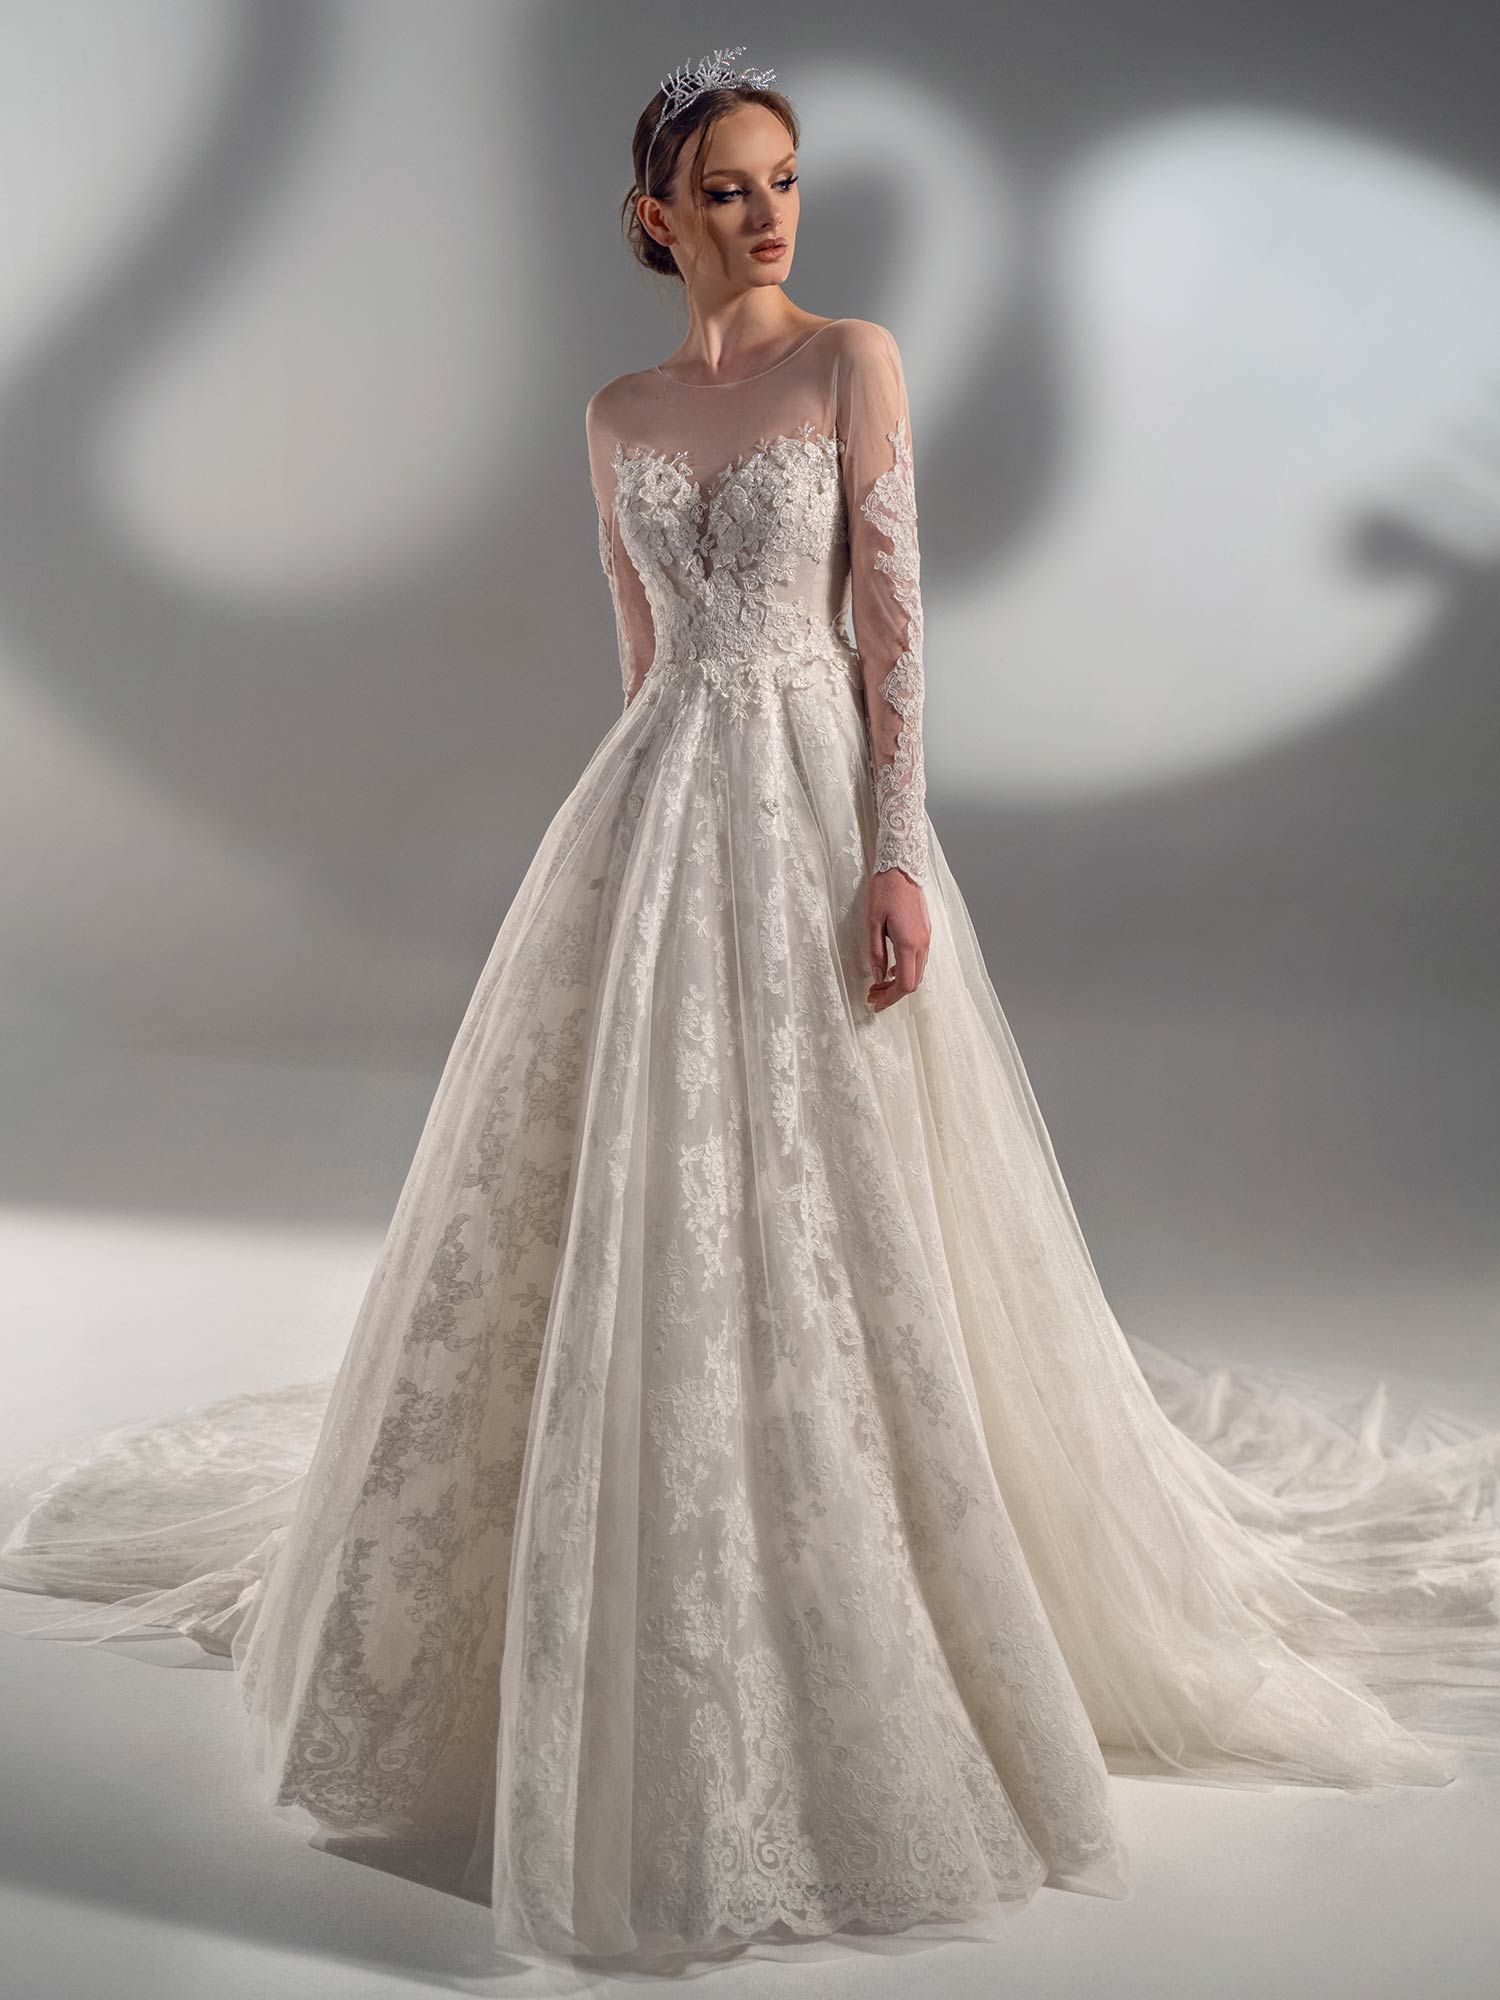 Ball Gown Wedding Dresses With Sleeves Top Review ball gown wedding ...